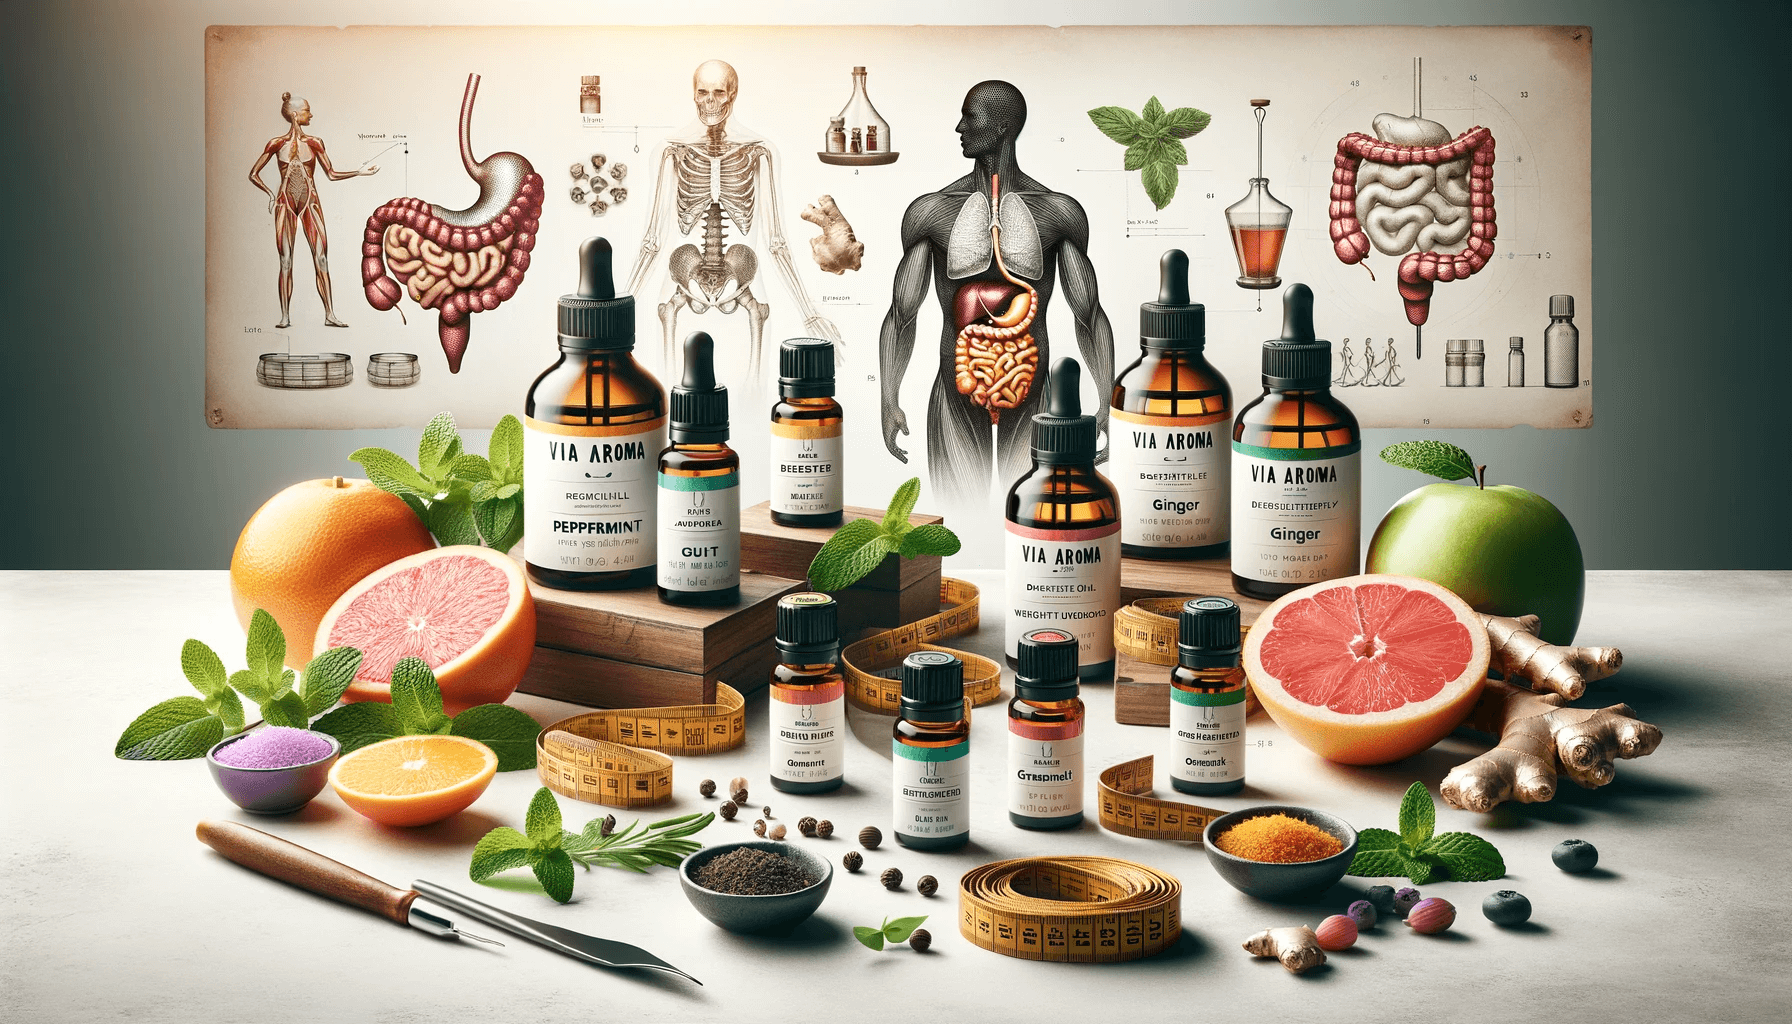 DALL·E 2024 01 23 16.02.51 Create an illustrative composition that embodies the theme of Gut Health and Weight Loss Digestive Aromatherapy with Via Aroma Essential Oils. The